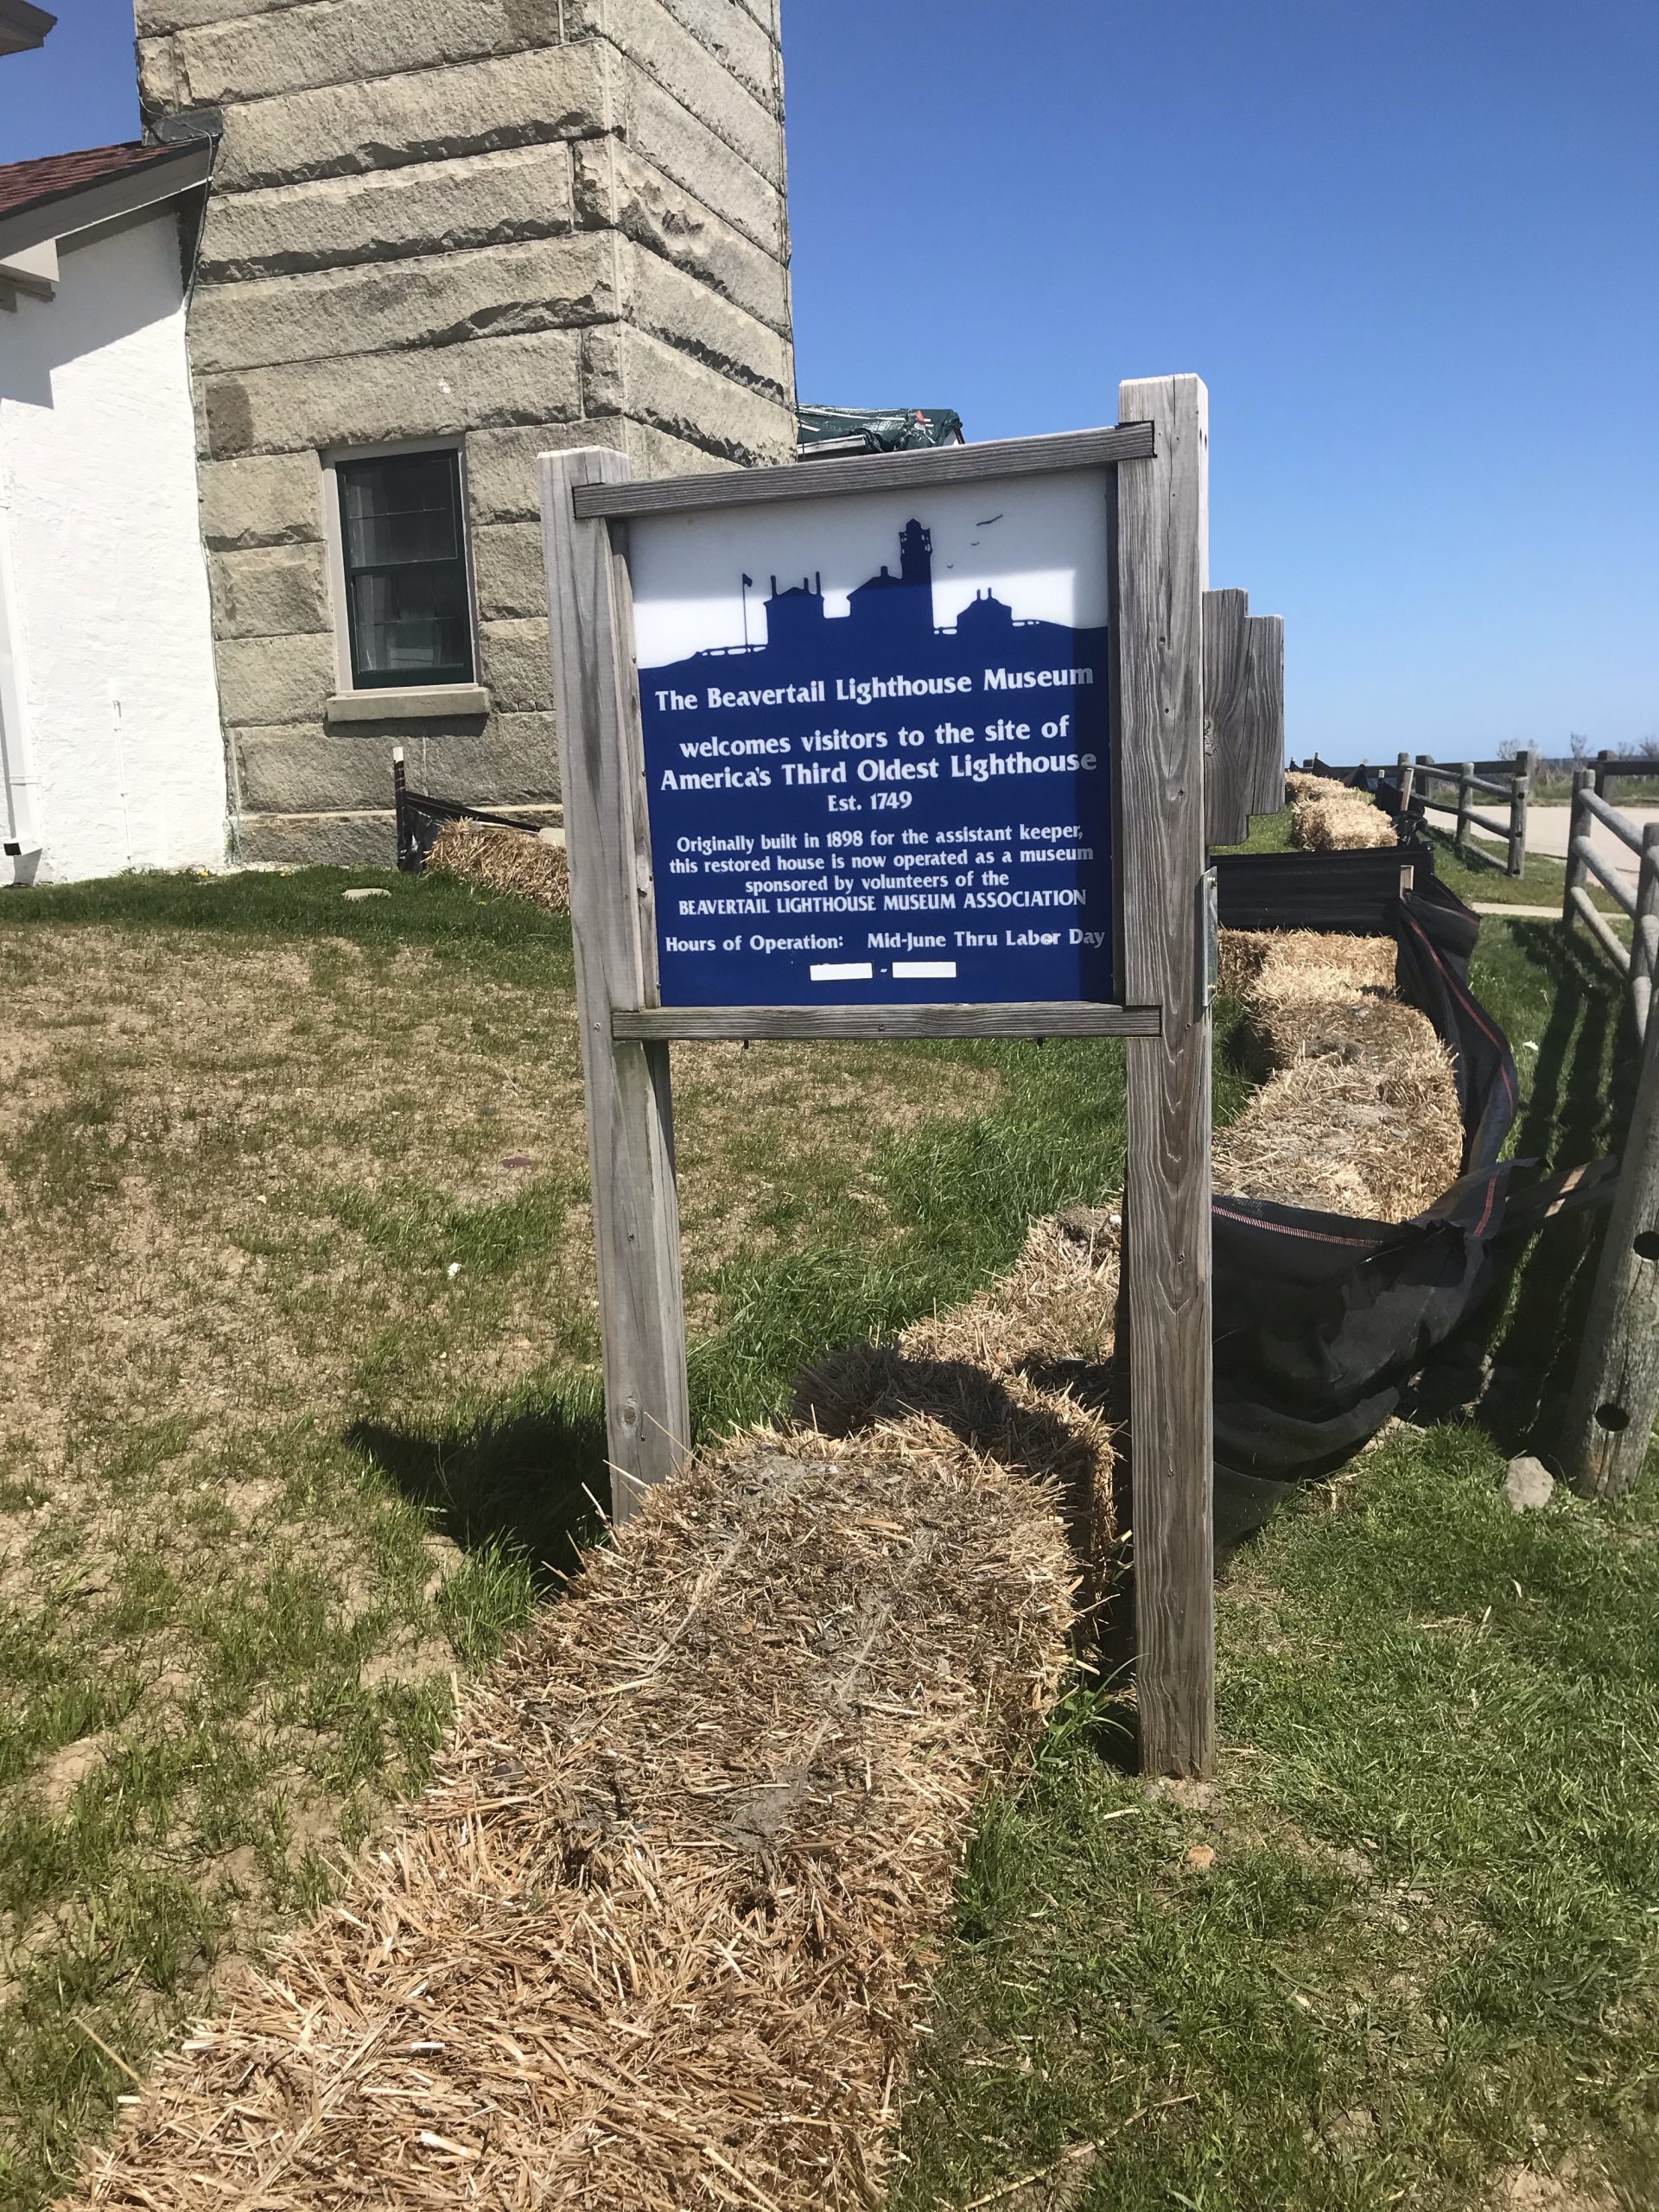 Signage for the Jamestown Light house Museum